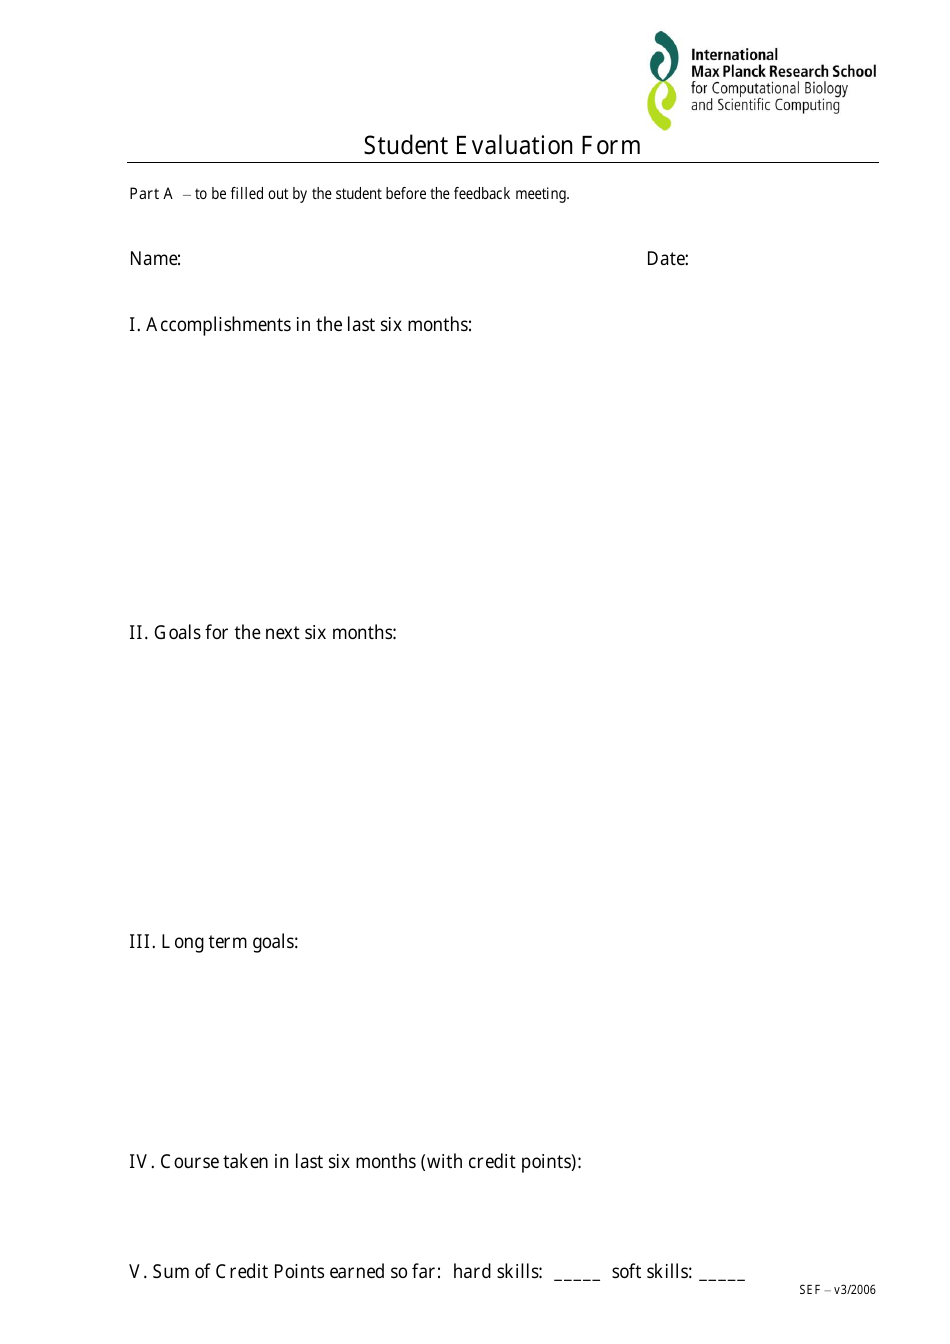 Student Evaluation Form - International Max Planck Research School, Page 1